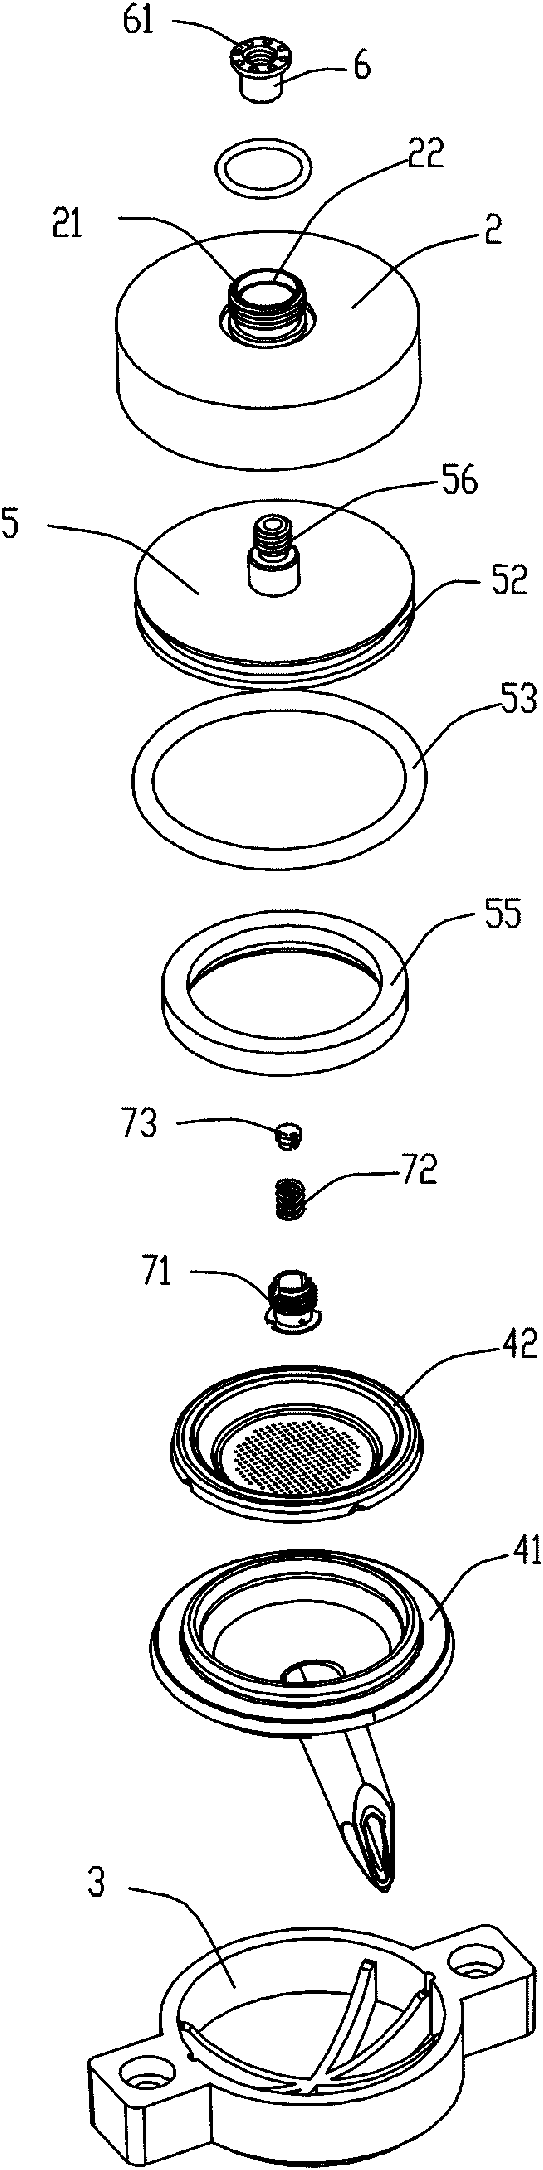 Extraction device of pressure-type coffee machine